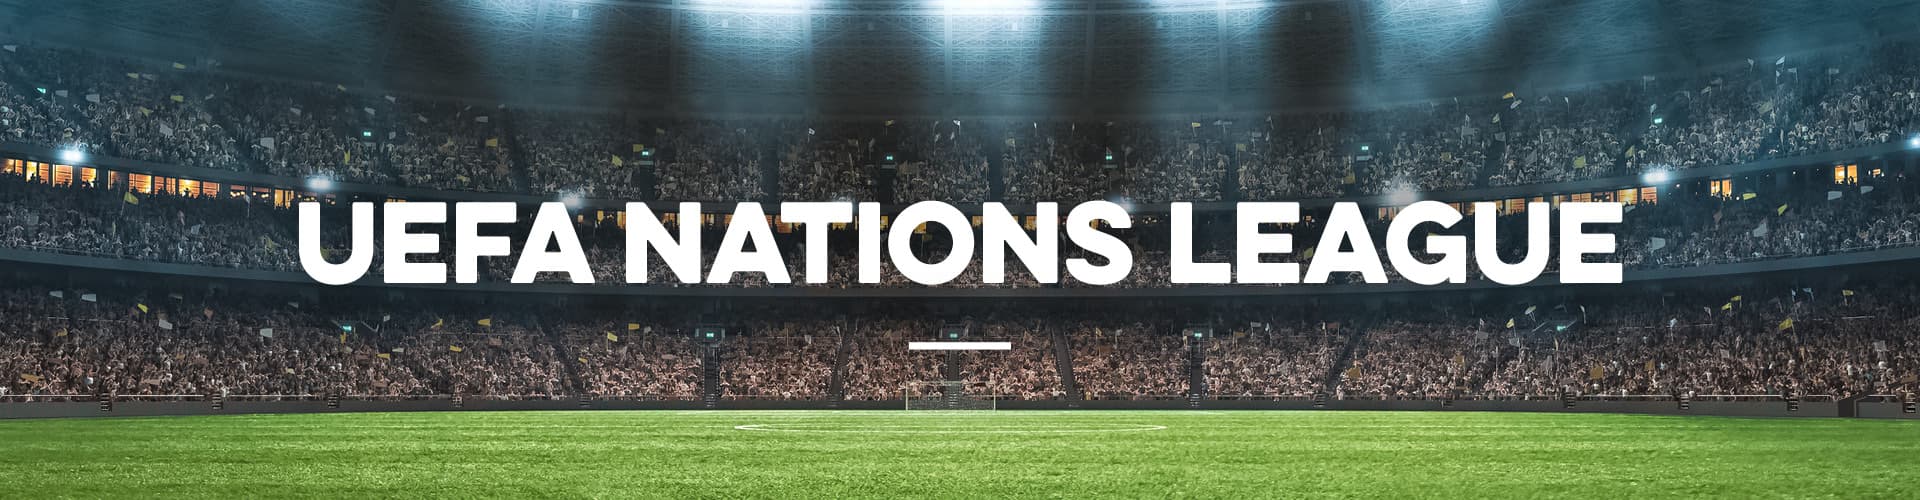 Watch UEFA Nations League at Great UK Pubs